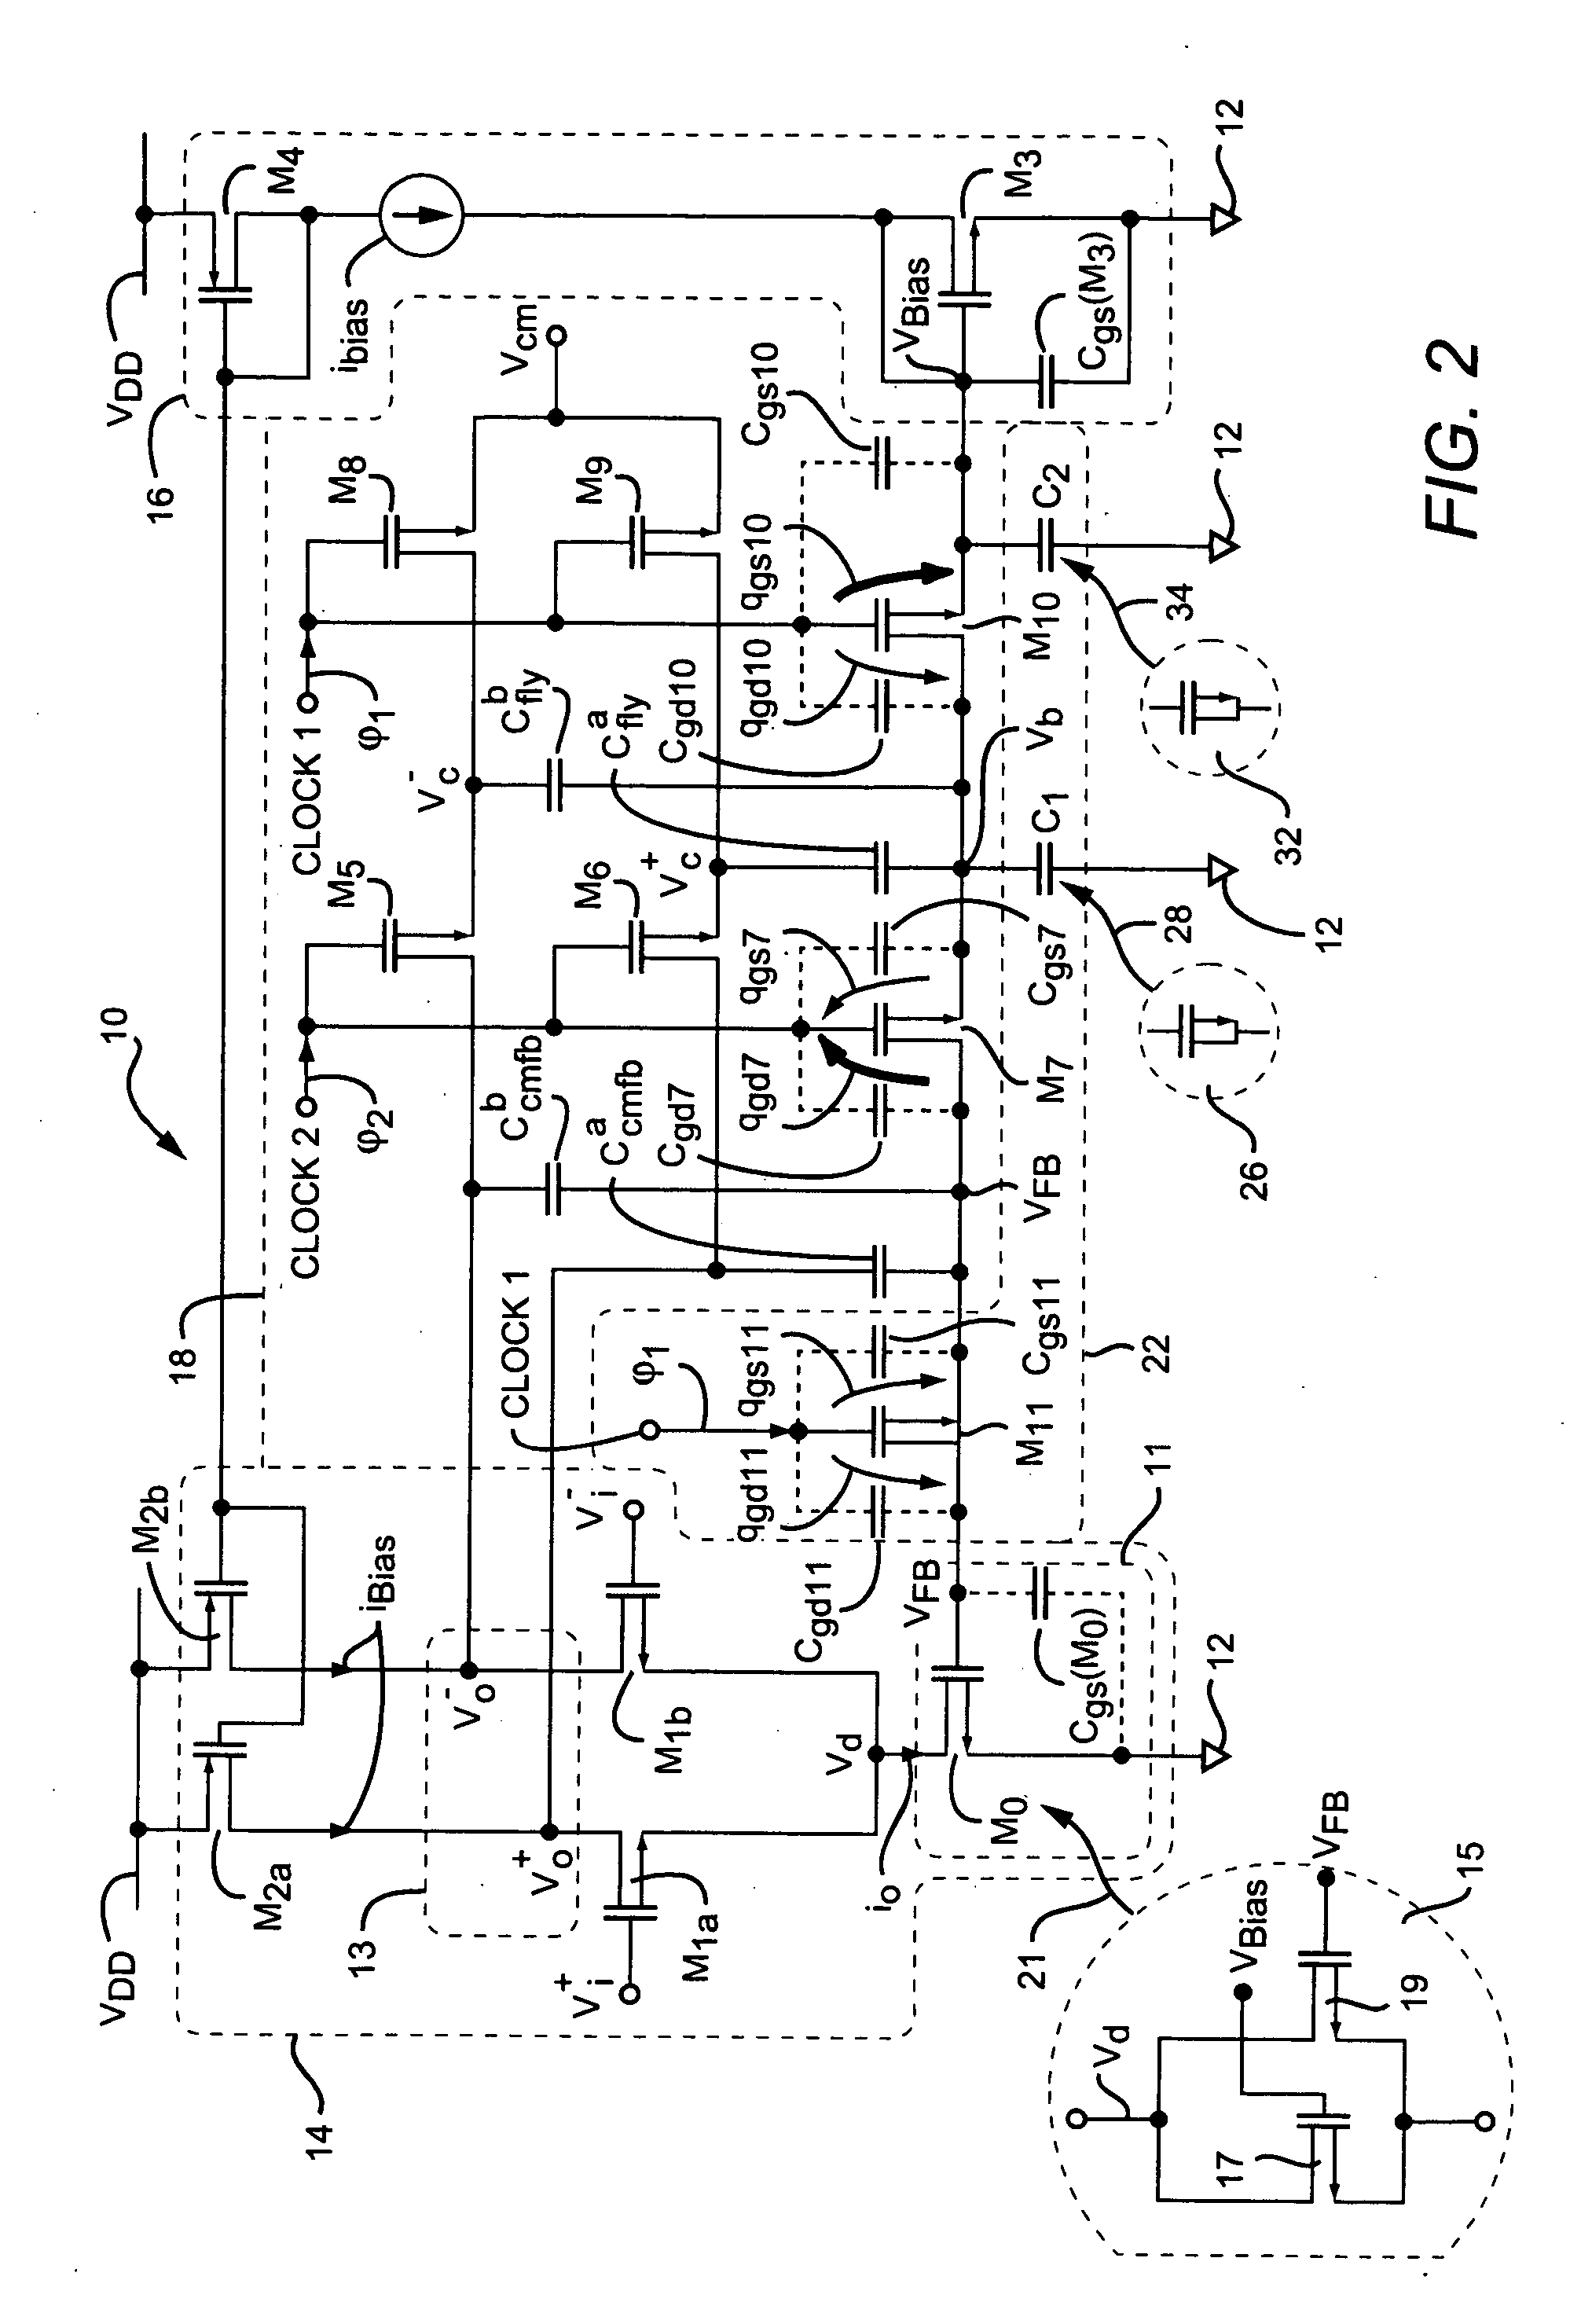 Switched capacitor circuit with reduced common-mode variations